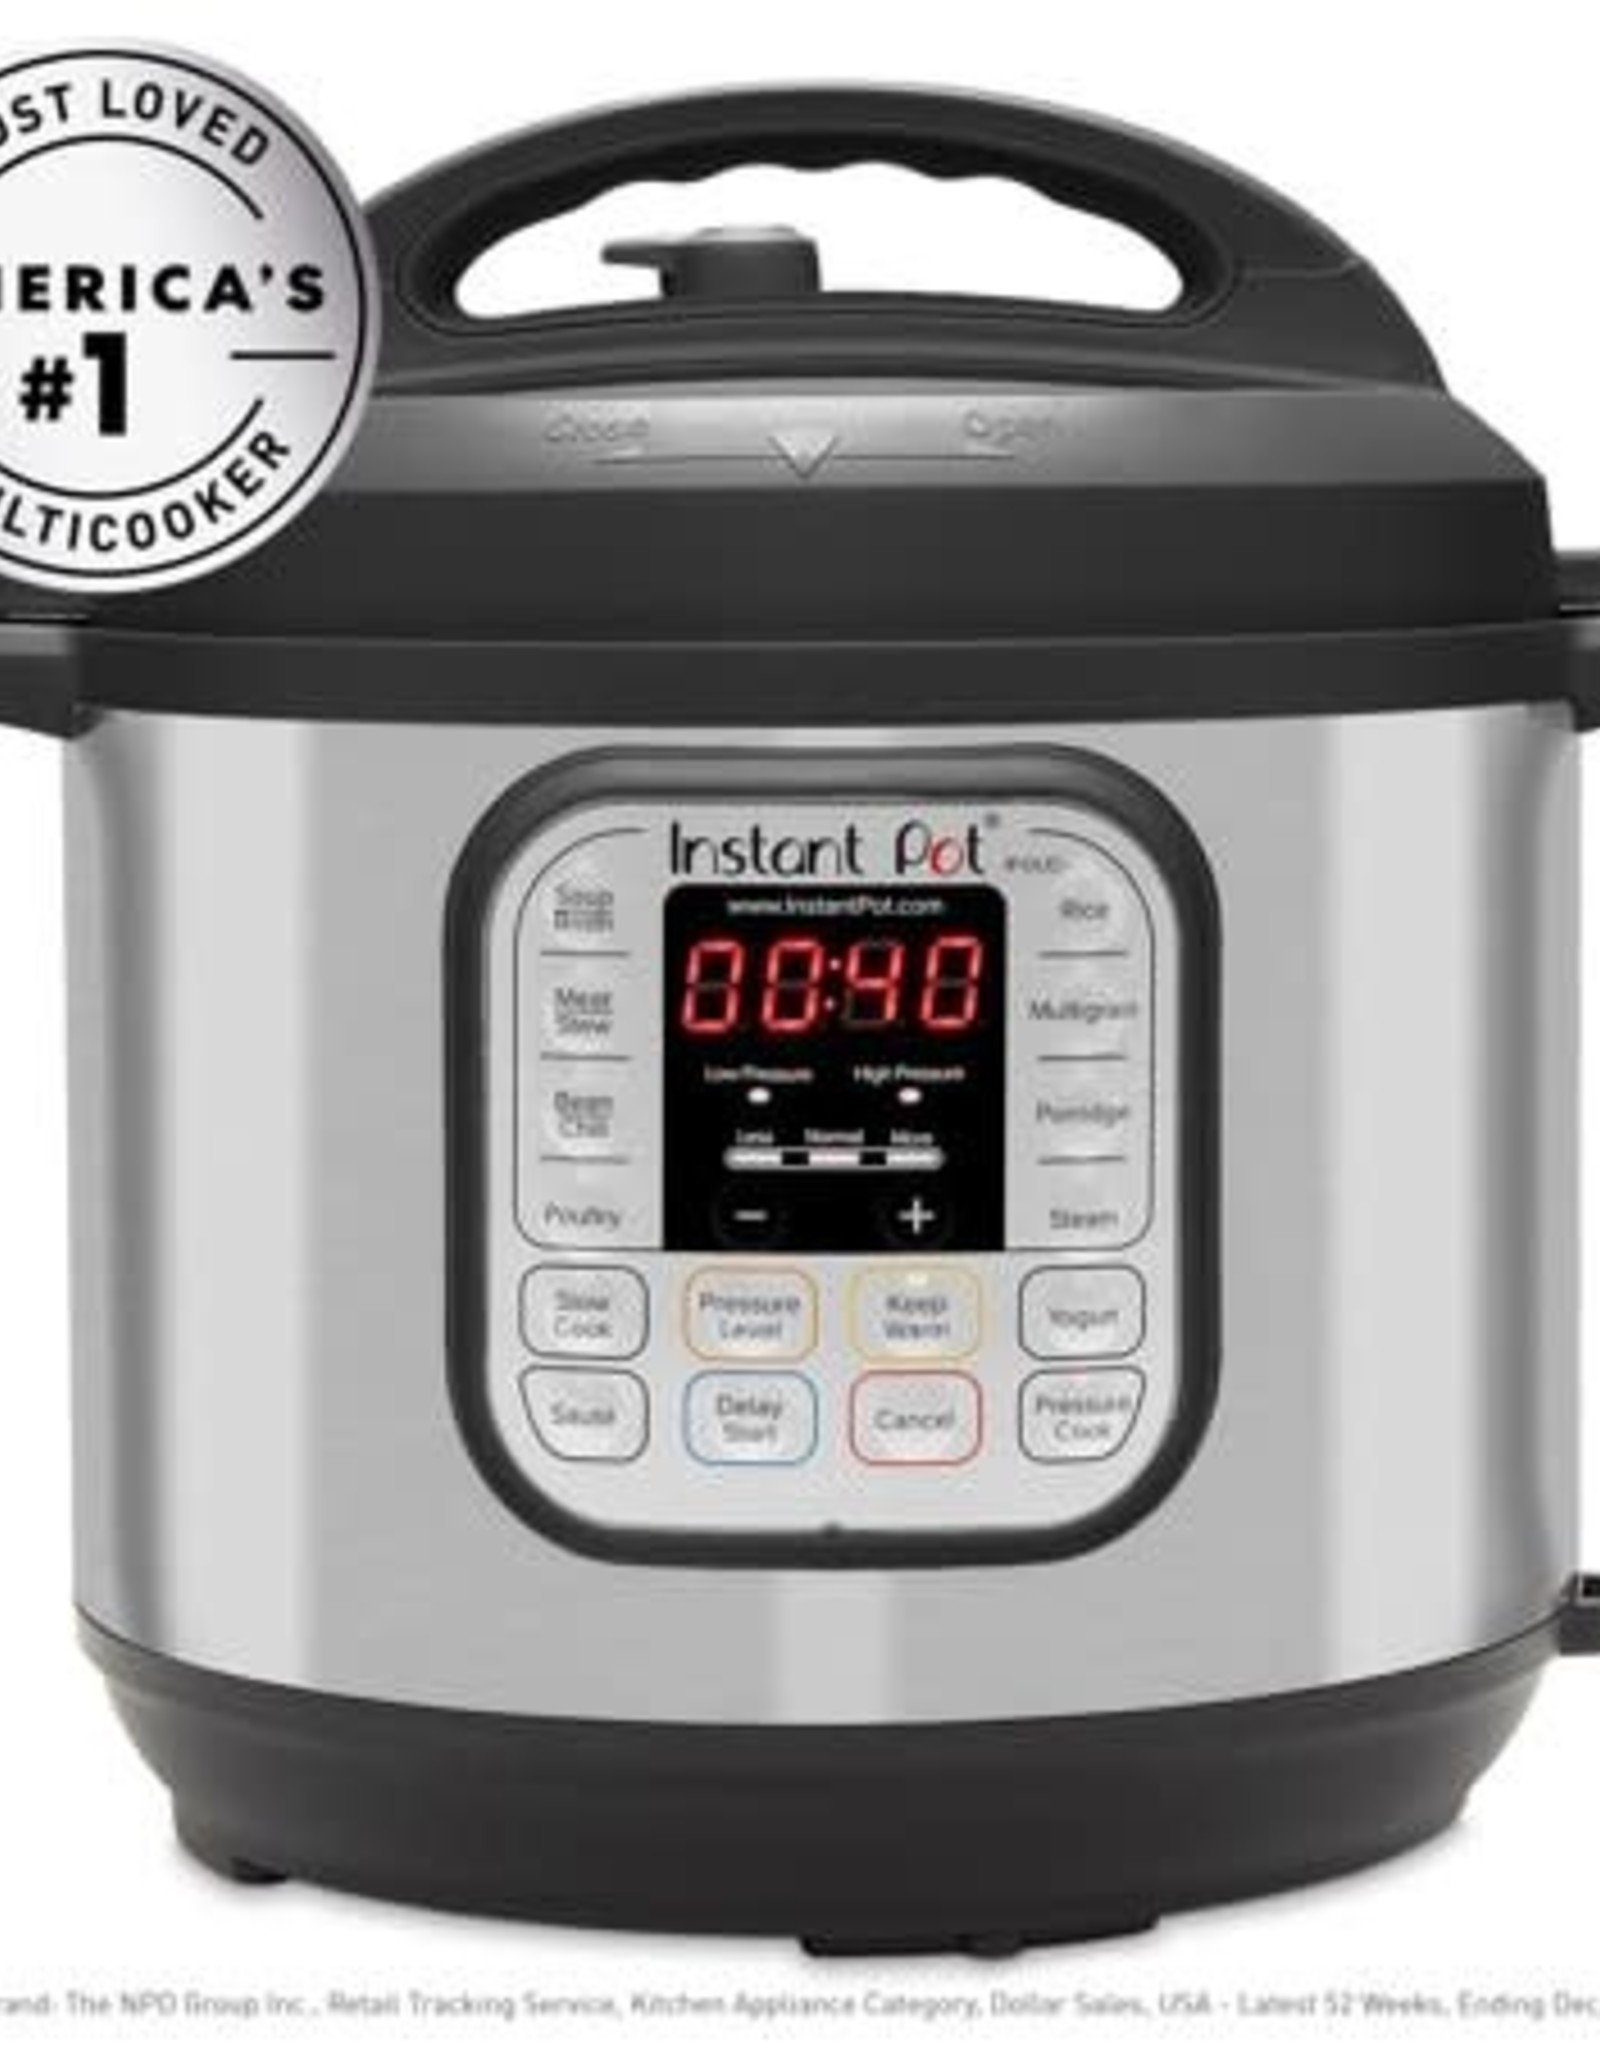 Instant Pot DUO60 6-Quart 7-in-1 Multi-Use Programmable Pressure Cooker, Slow Cooker, Rice Cooker, Sauté, Steamer, Yogurt Maker and Warmer Instant Pot DUO60 6-Quart 7-in-1 Multi-Use Programmable Pressure Cooker, Slow Cooker, Rice Cooker, Sauté, Steamer